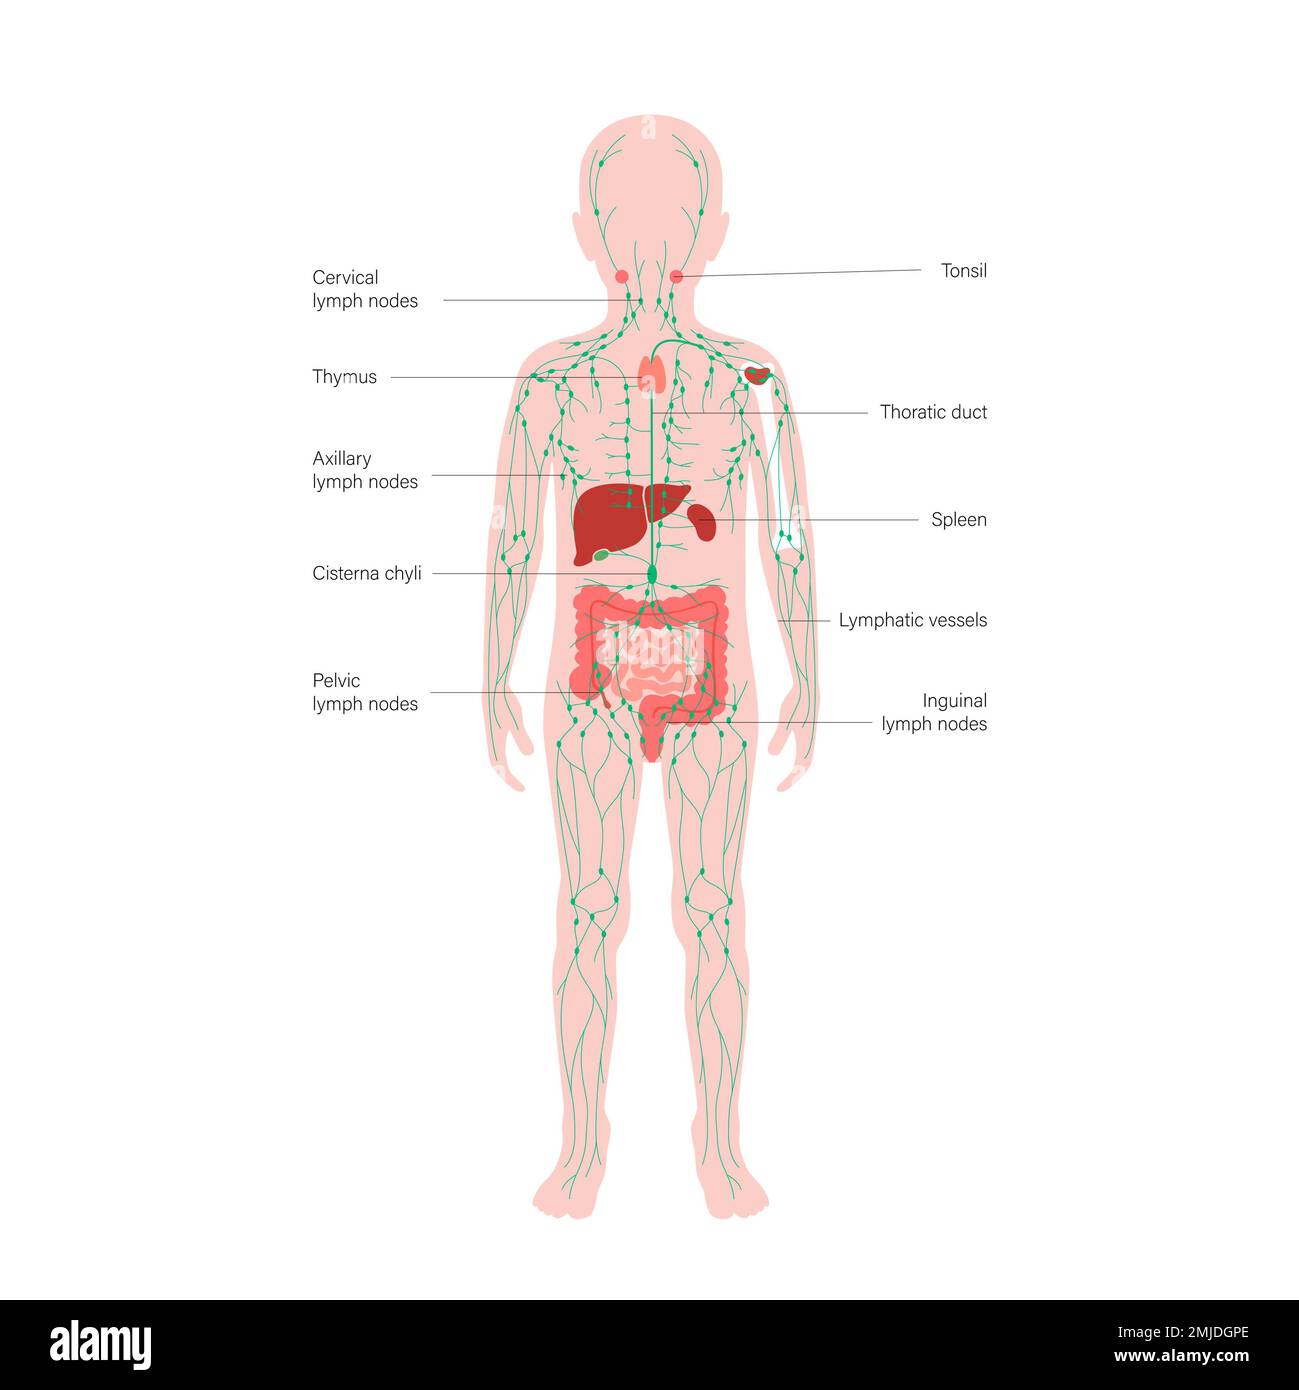 Lymphatic system and organs, illustration Stock Photo